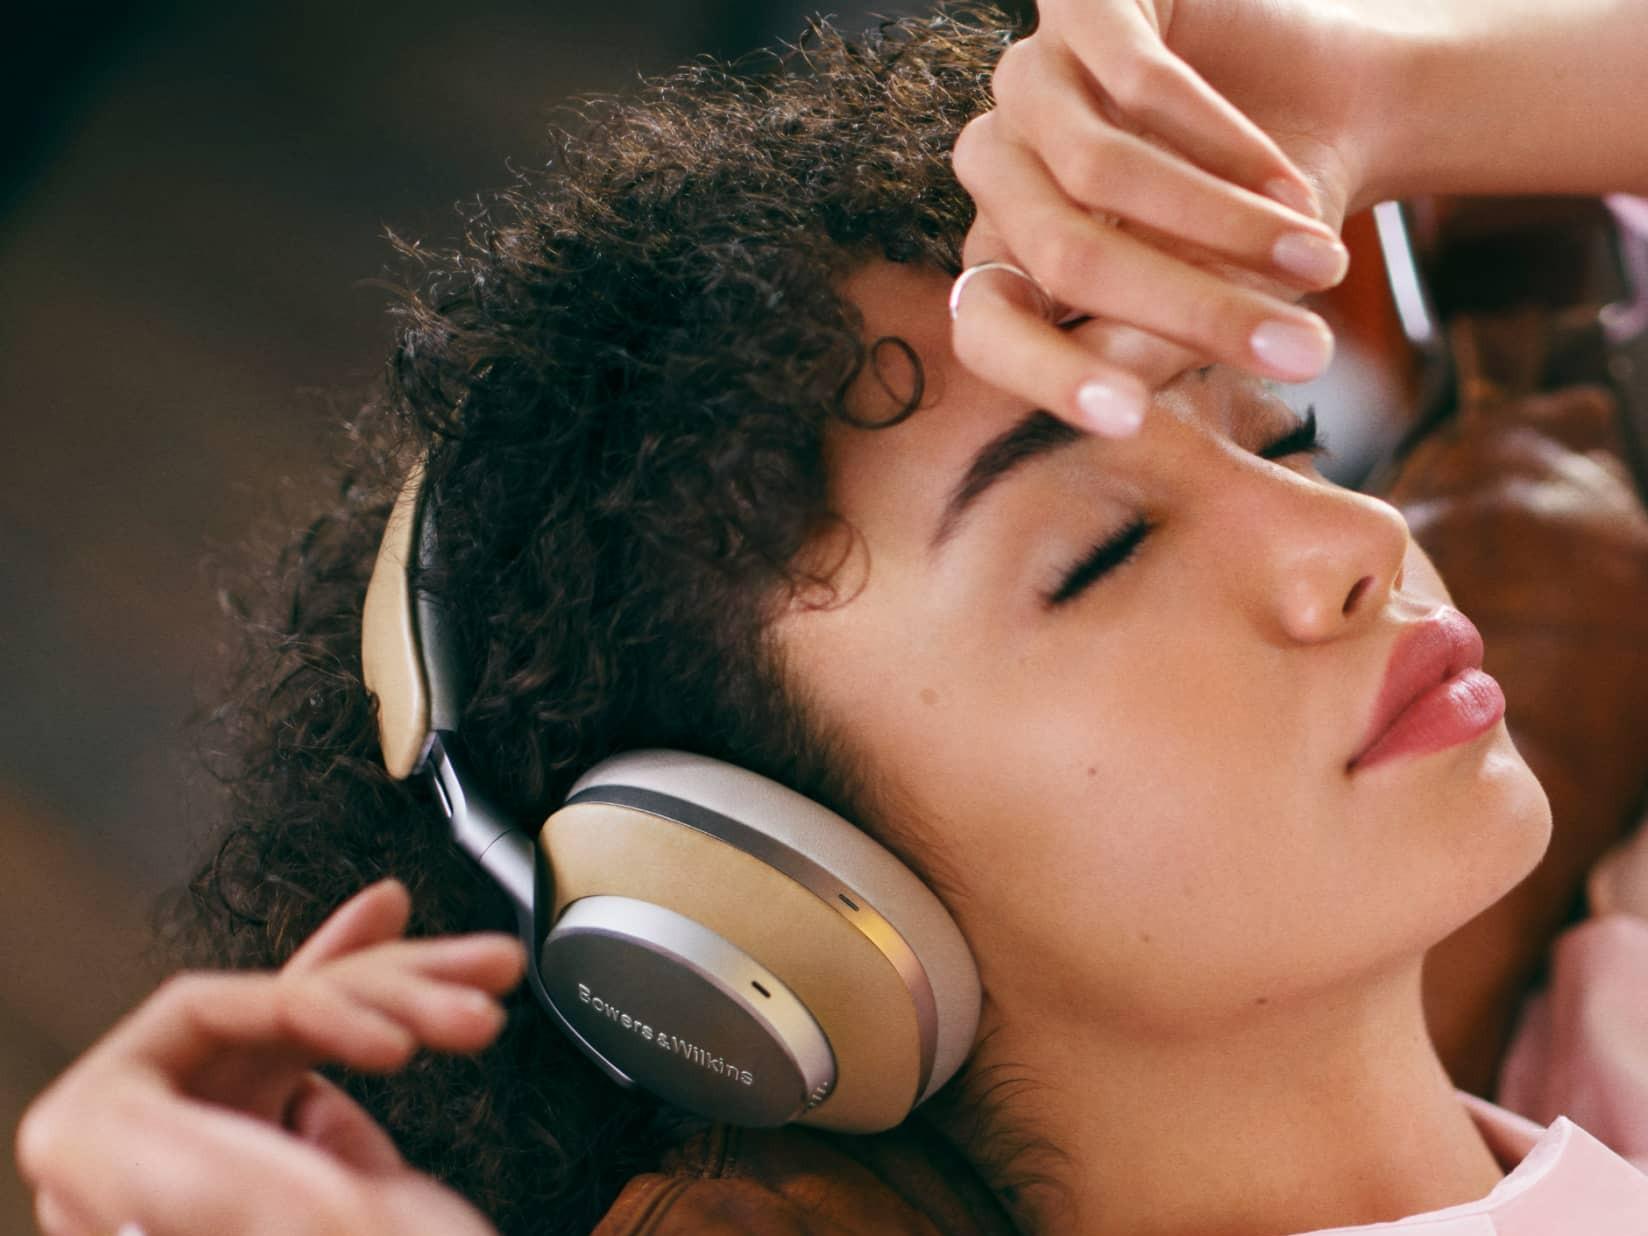 A woman with black curly hair listens with her eyes closed to the white model Bowers & Wilkins headphones